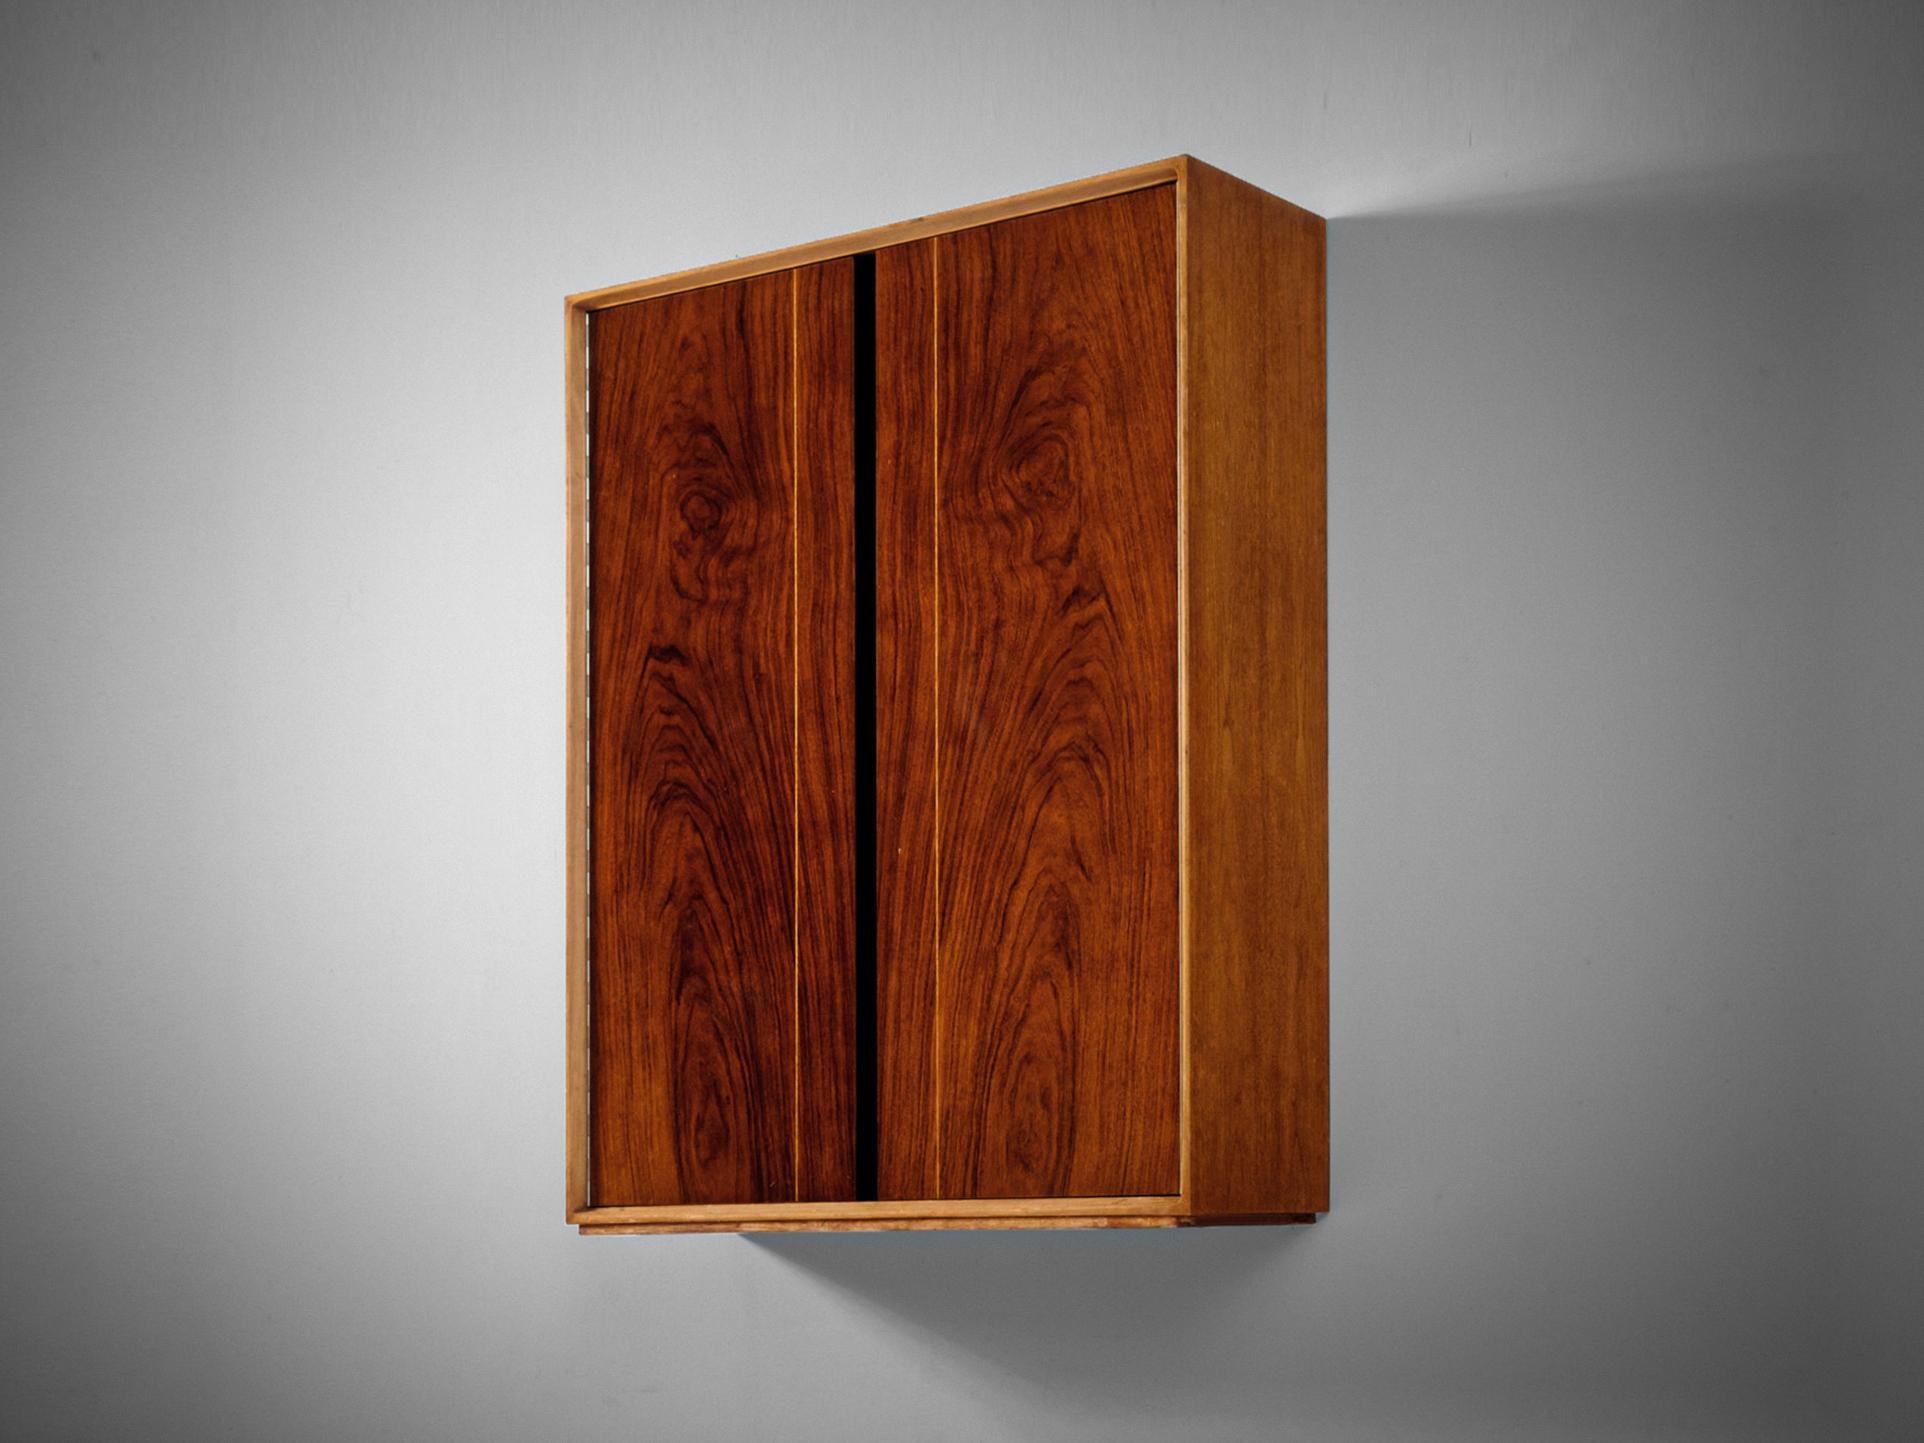 De Coene Frères, wall-mounted bar cabinet model 'Madison', walnut, Belgium, 1958.

Floating wall-mounted dry bar in walnut by de Belgian manufacturer De Coene. The quality of pieces from these manufacturers are absolutely stunning and hold great